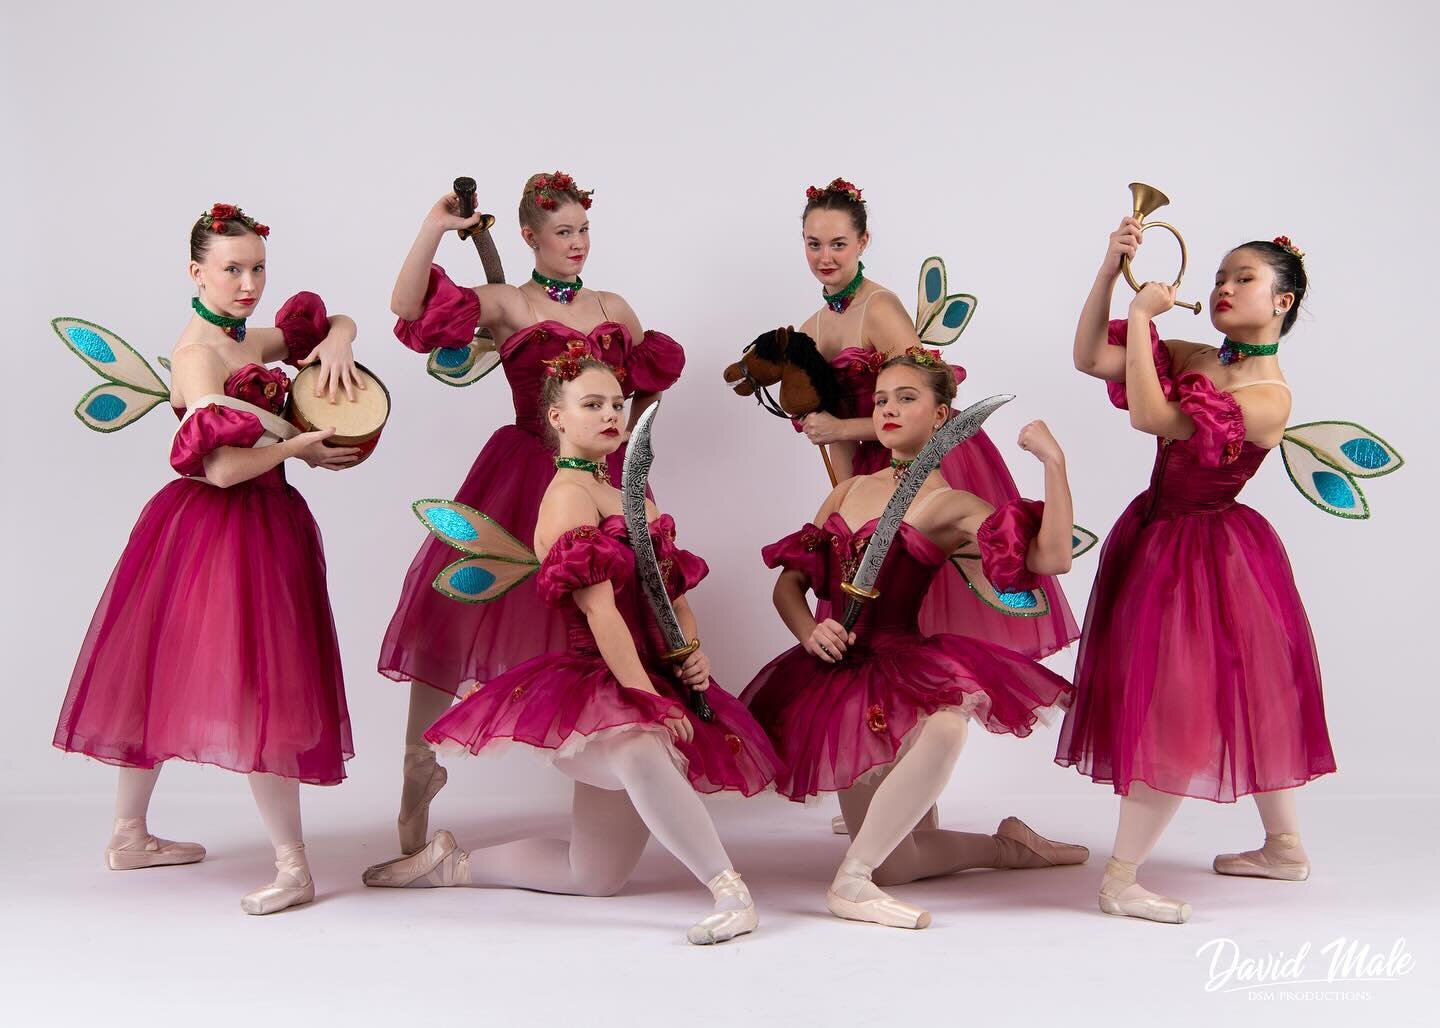 These Sugar Plums are ready to bring it!  #nutcrackerballet #ballet #balletphotography #dance photographer